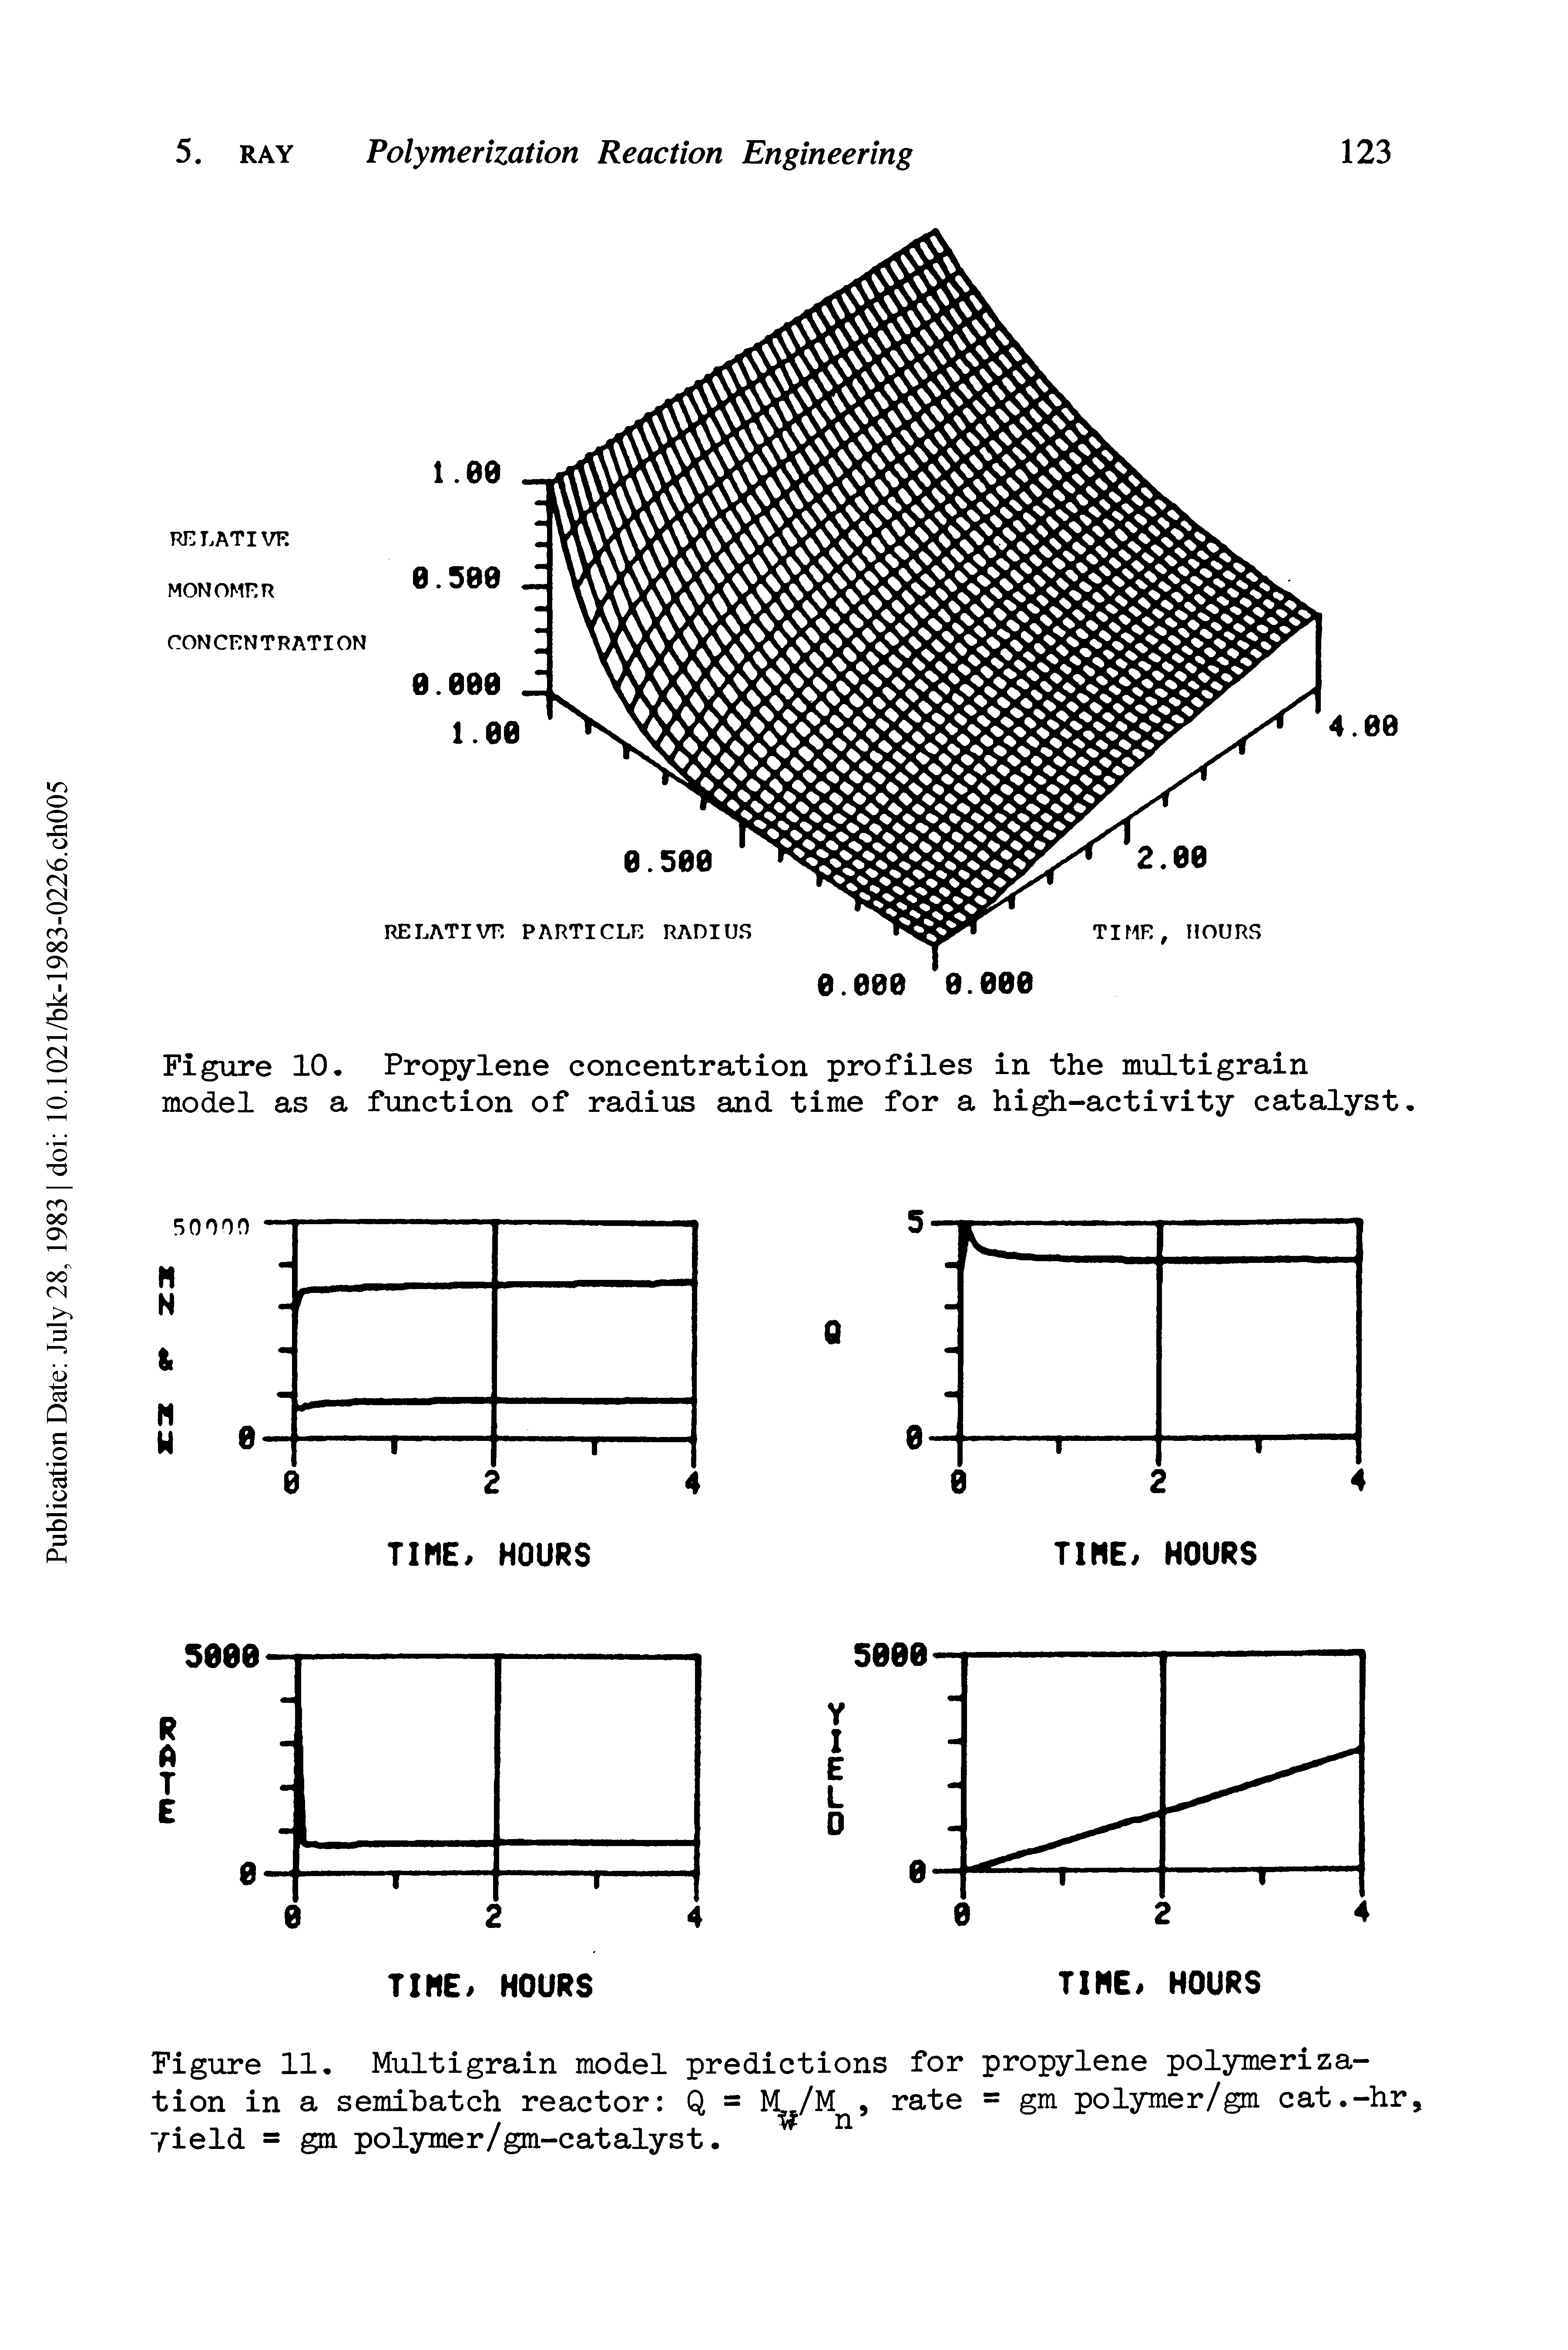 Figure 10, Propylene concentration profiles in the multigrain model as a function of radius and time for a high-activity catalyst.